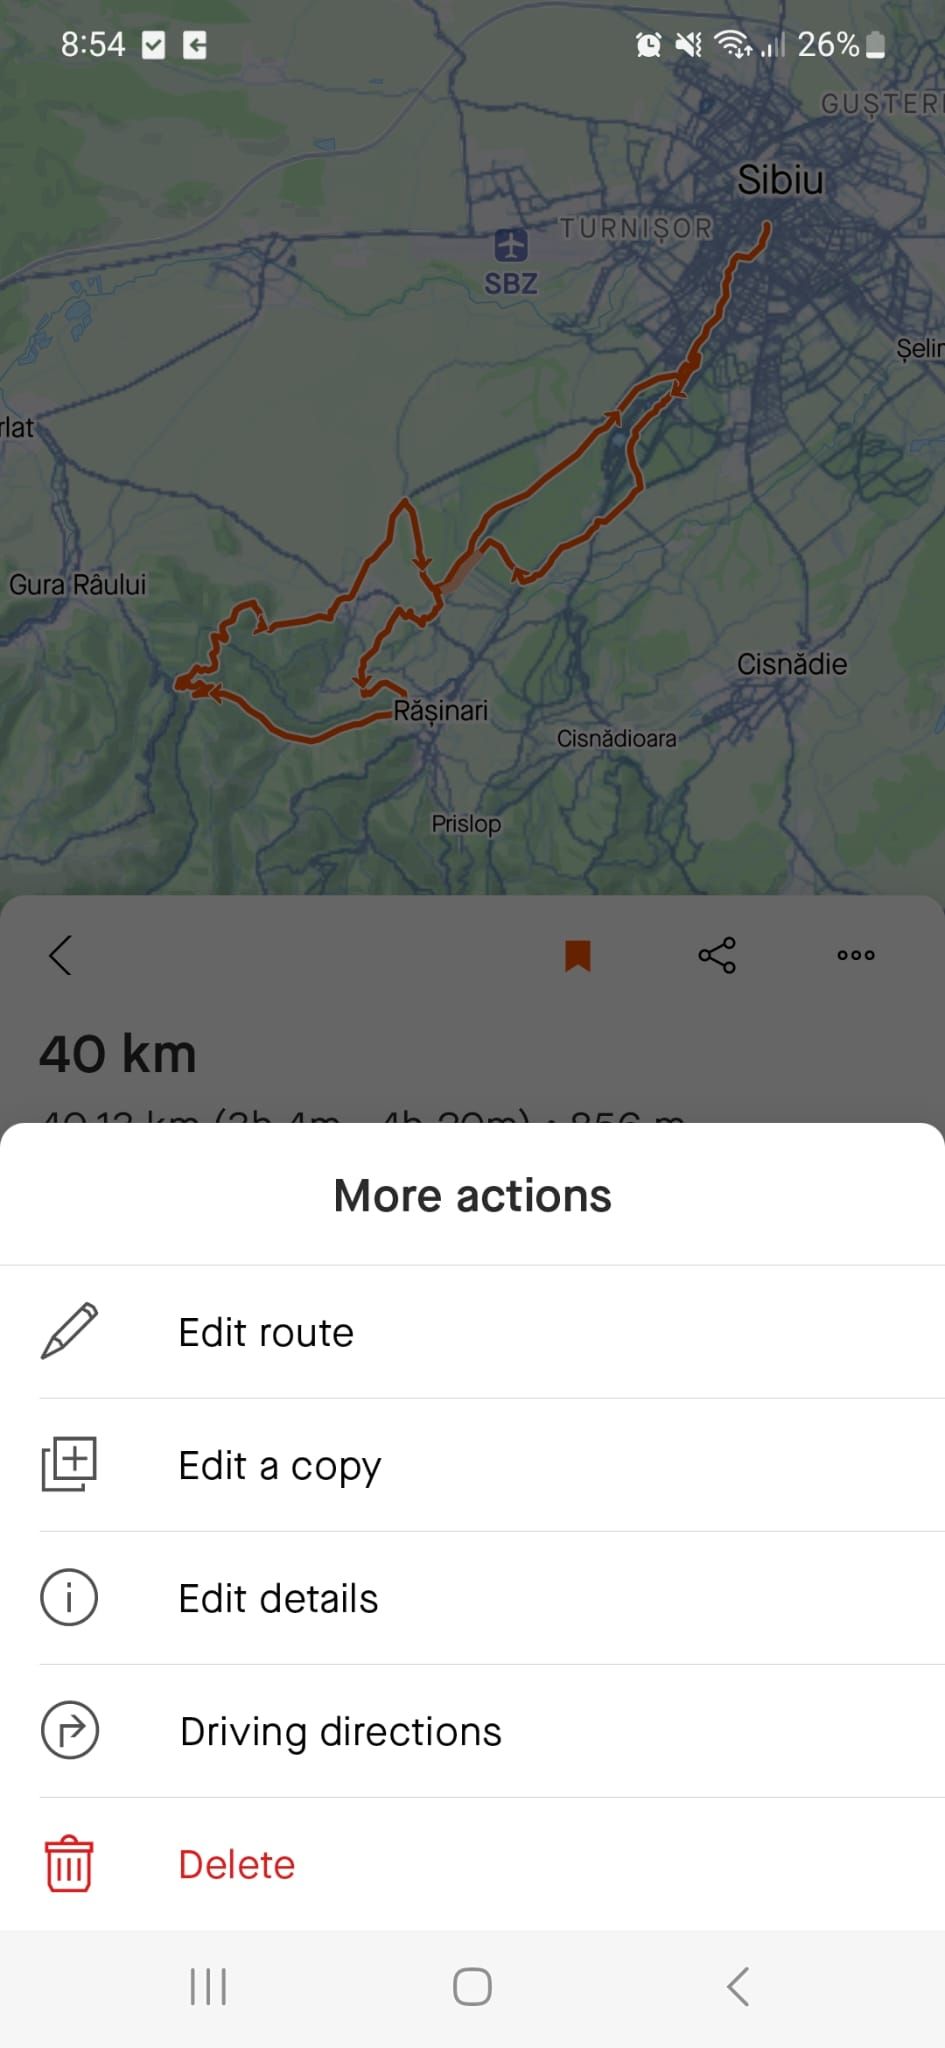 Edit one of your saved routes on Strava